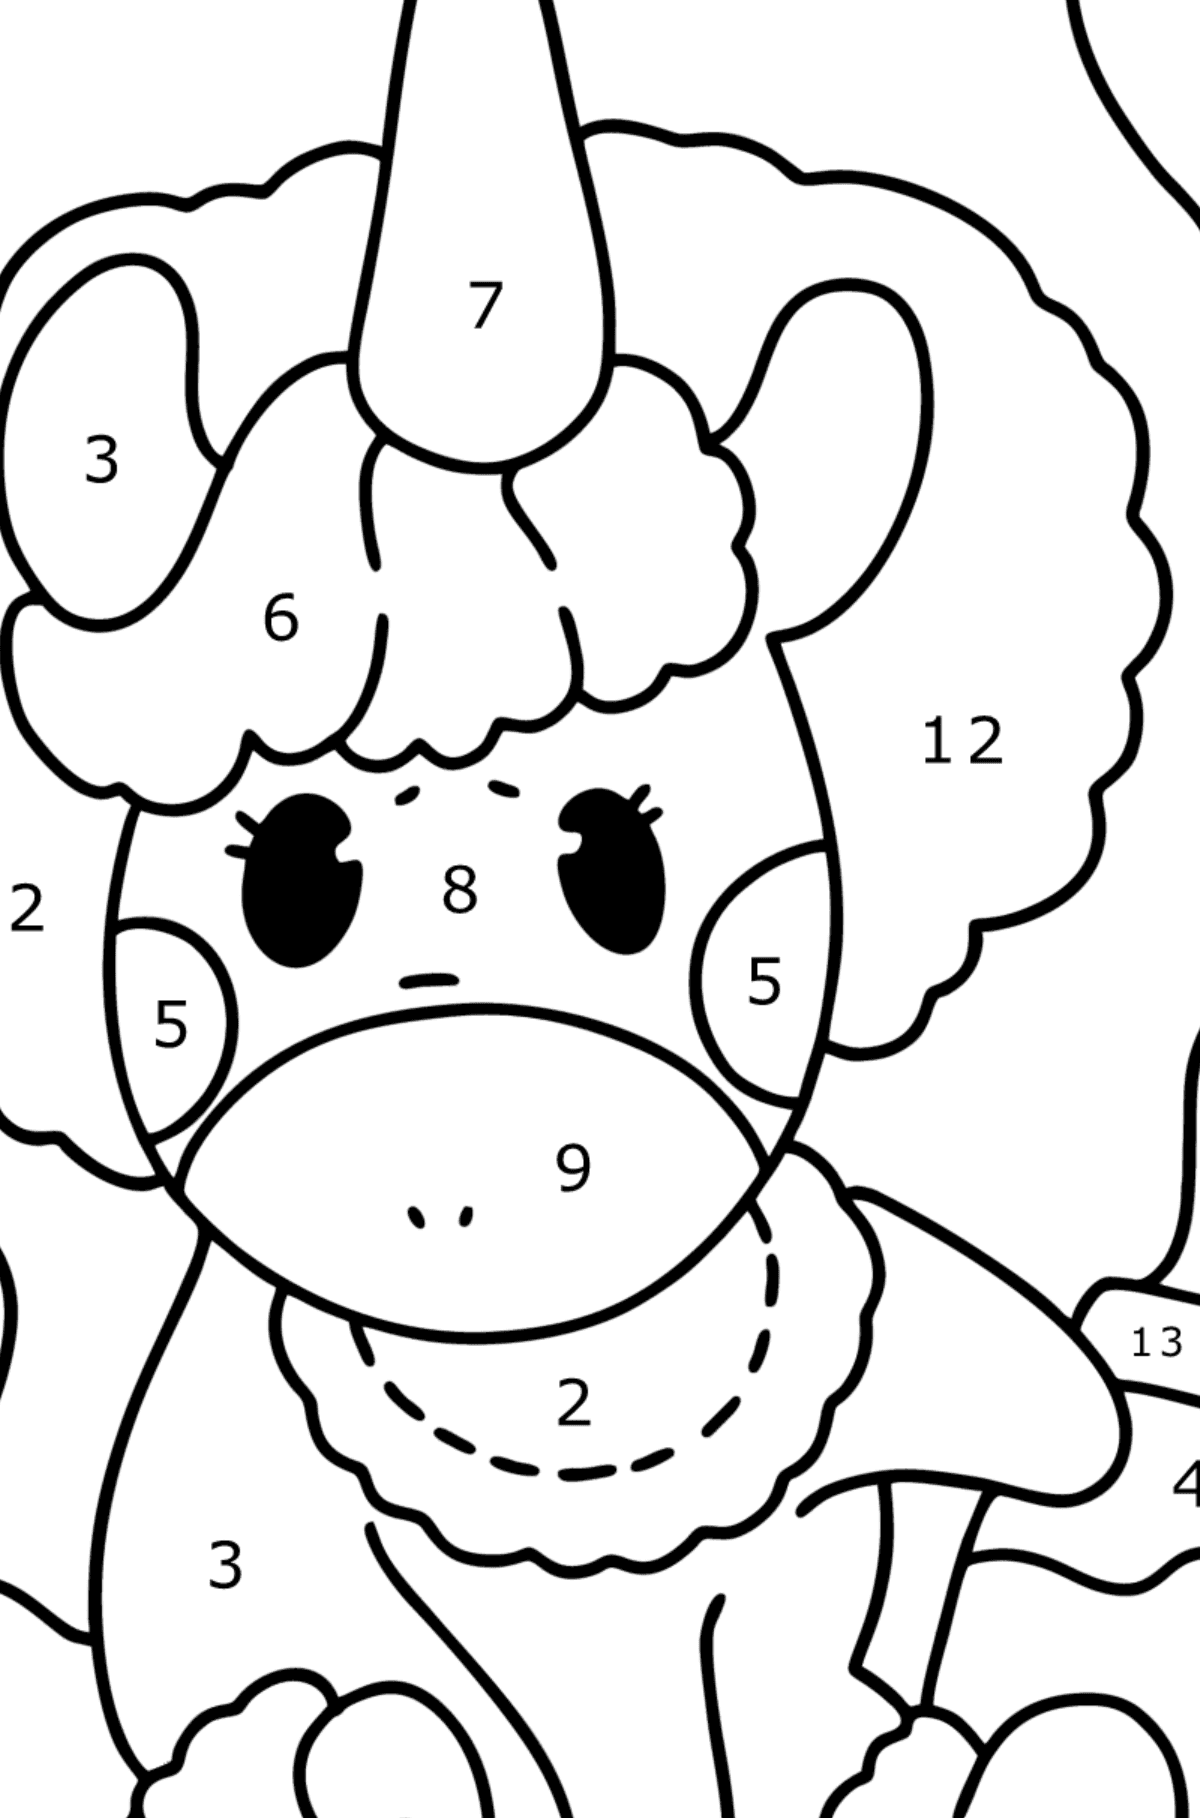 Unicorn kid coloring page - Coloring by Numbers for Kids